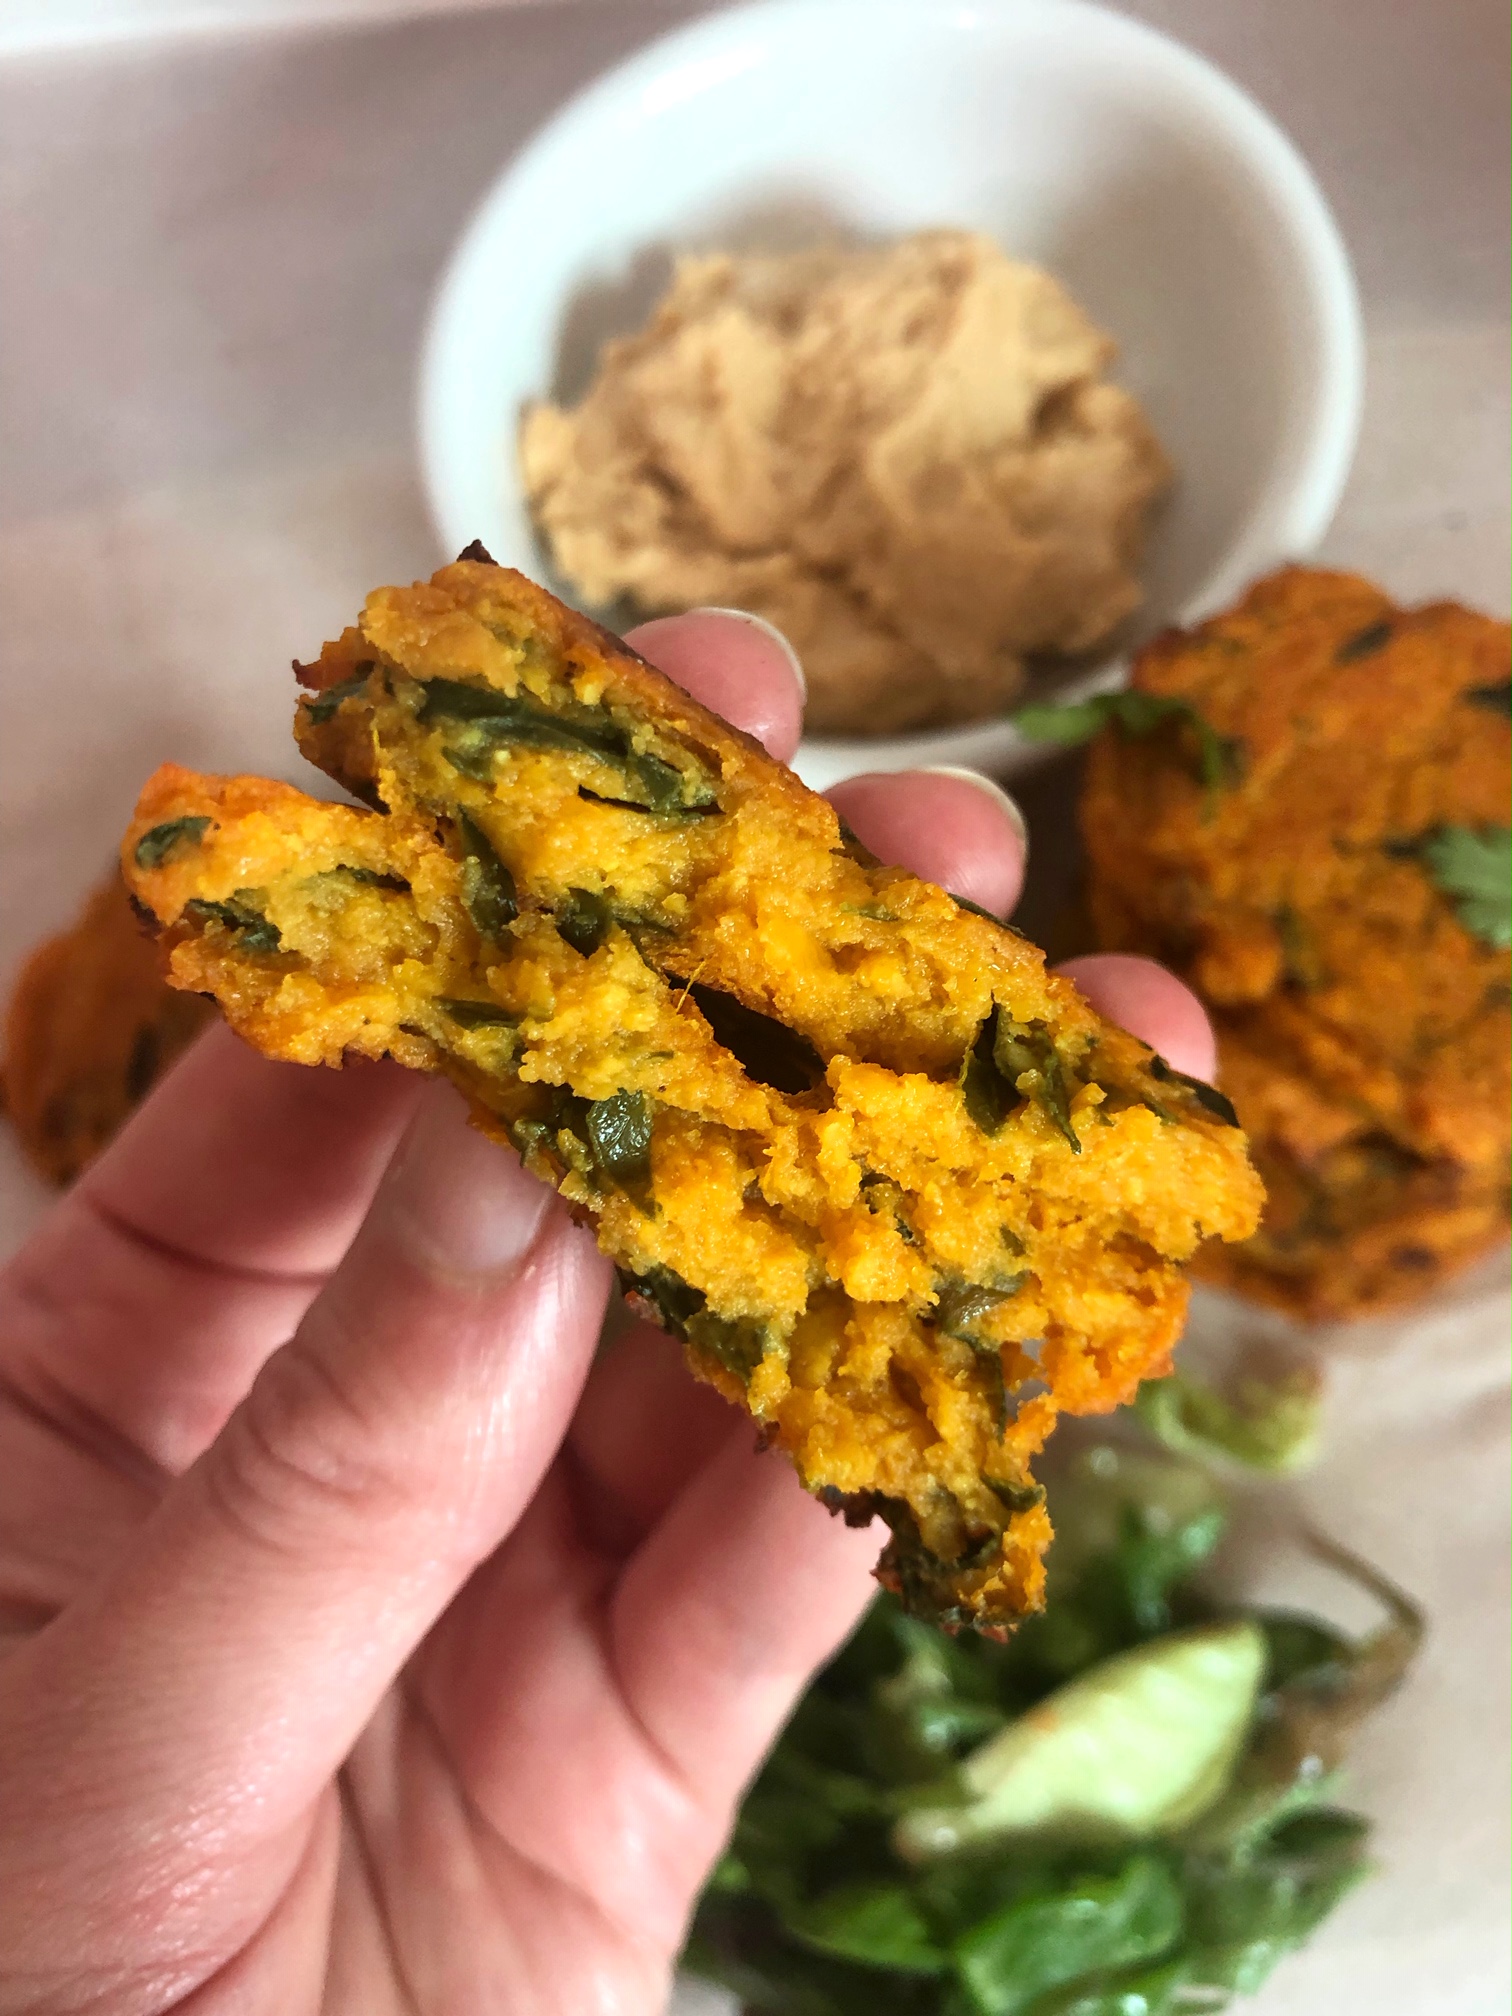 Who wants a delicious, cafe style breakfast without leaving the house? These vegan, Sweet Potato Patties are so easy to make, you'll be inviting everyone over to eat at your place!